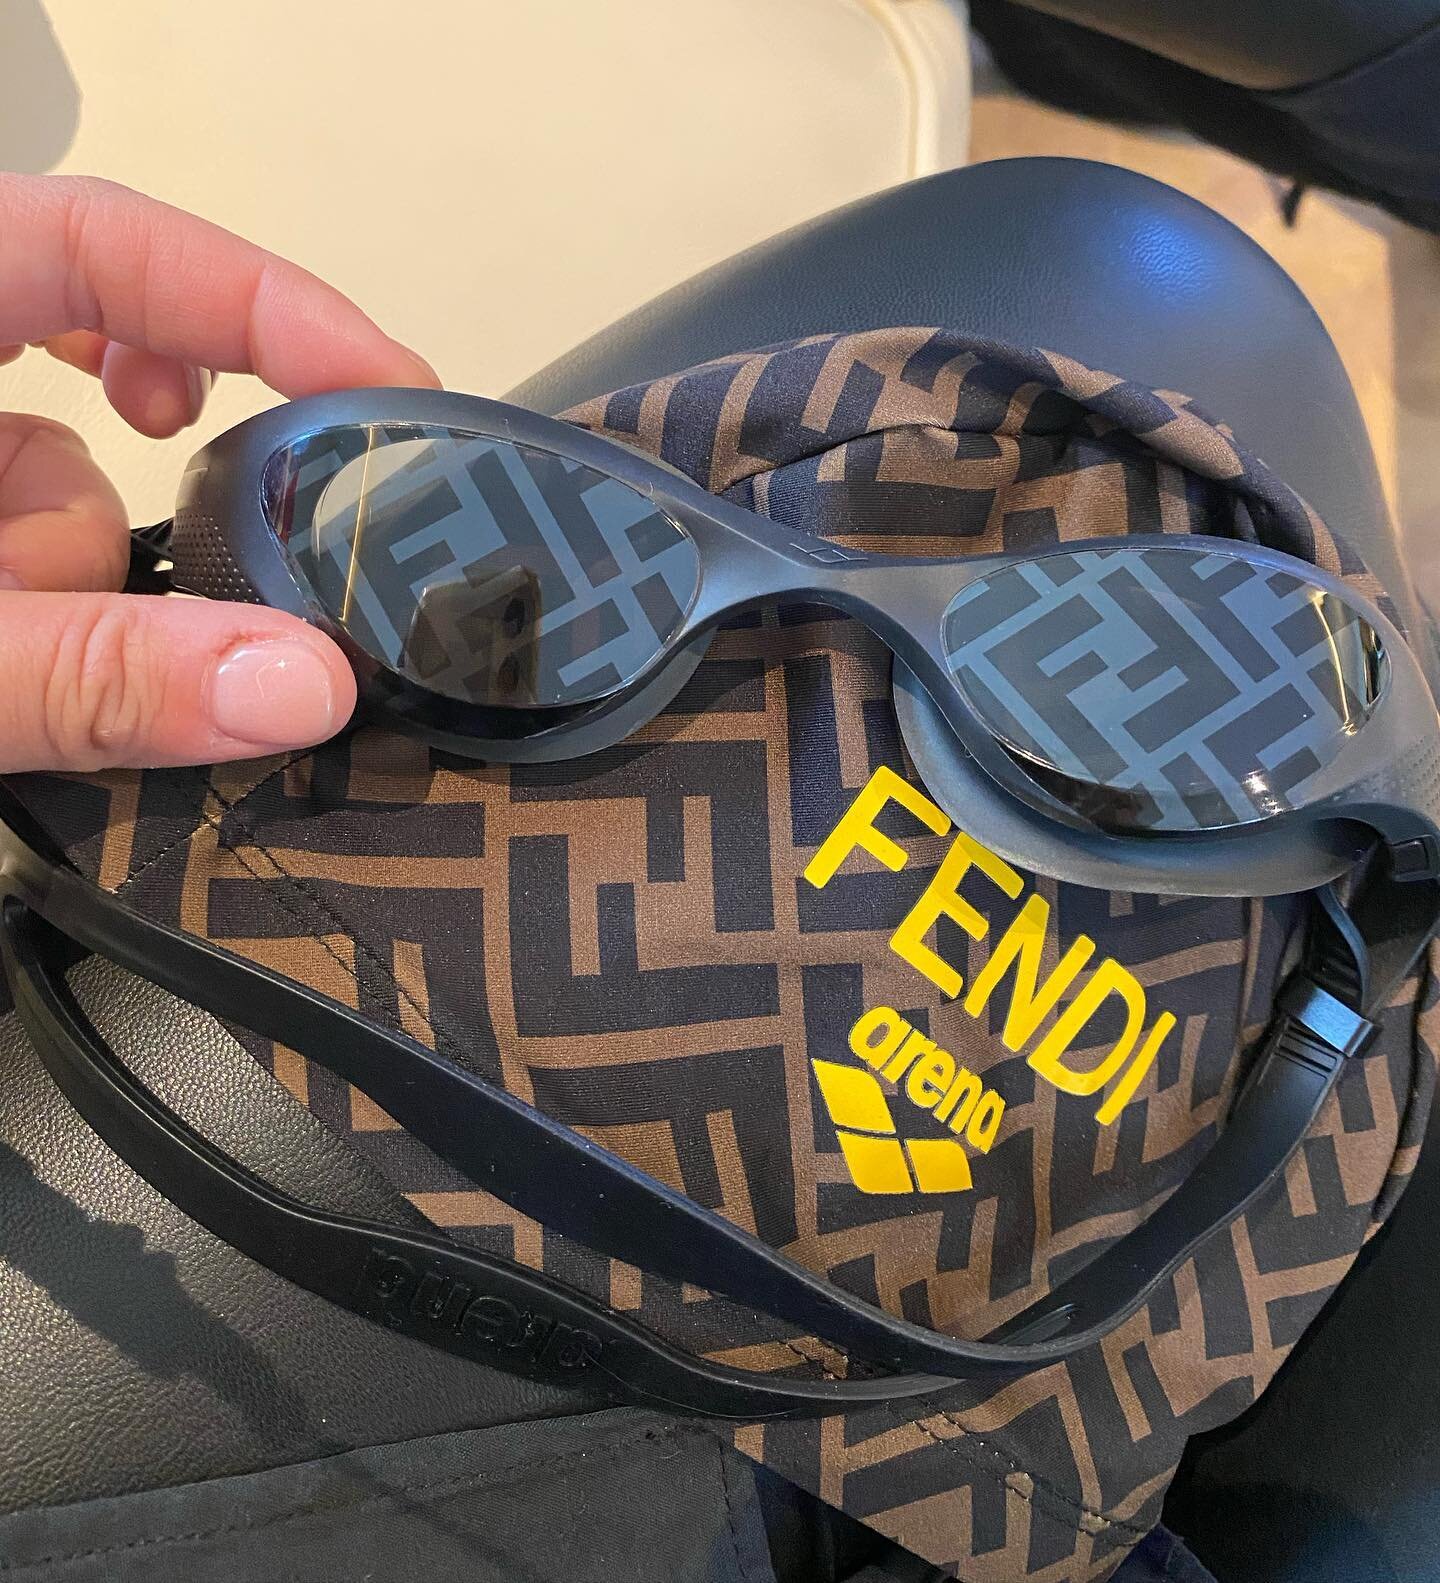 @fendi X @arena_swim_apparel 🥽 🏊 

Fendi swim cap and goggles represent the collaboration between FENDI and ARENA. The limited edition celebrates the creative style and technology of two leaders in the sport and luxury world